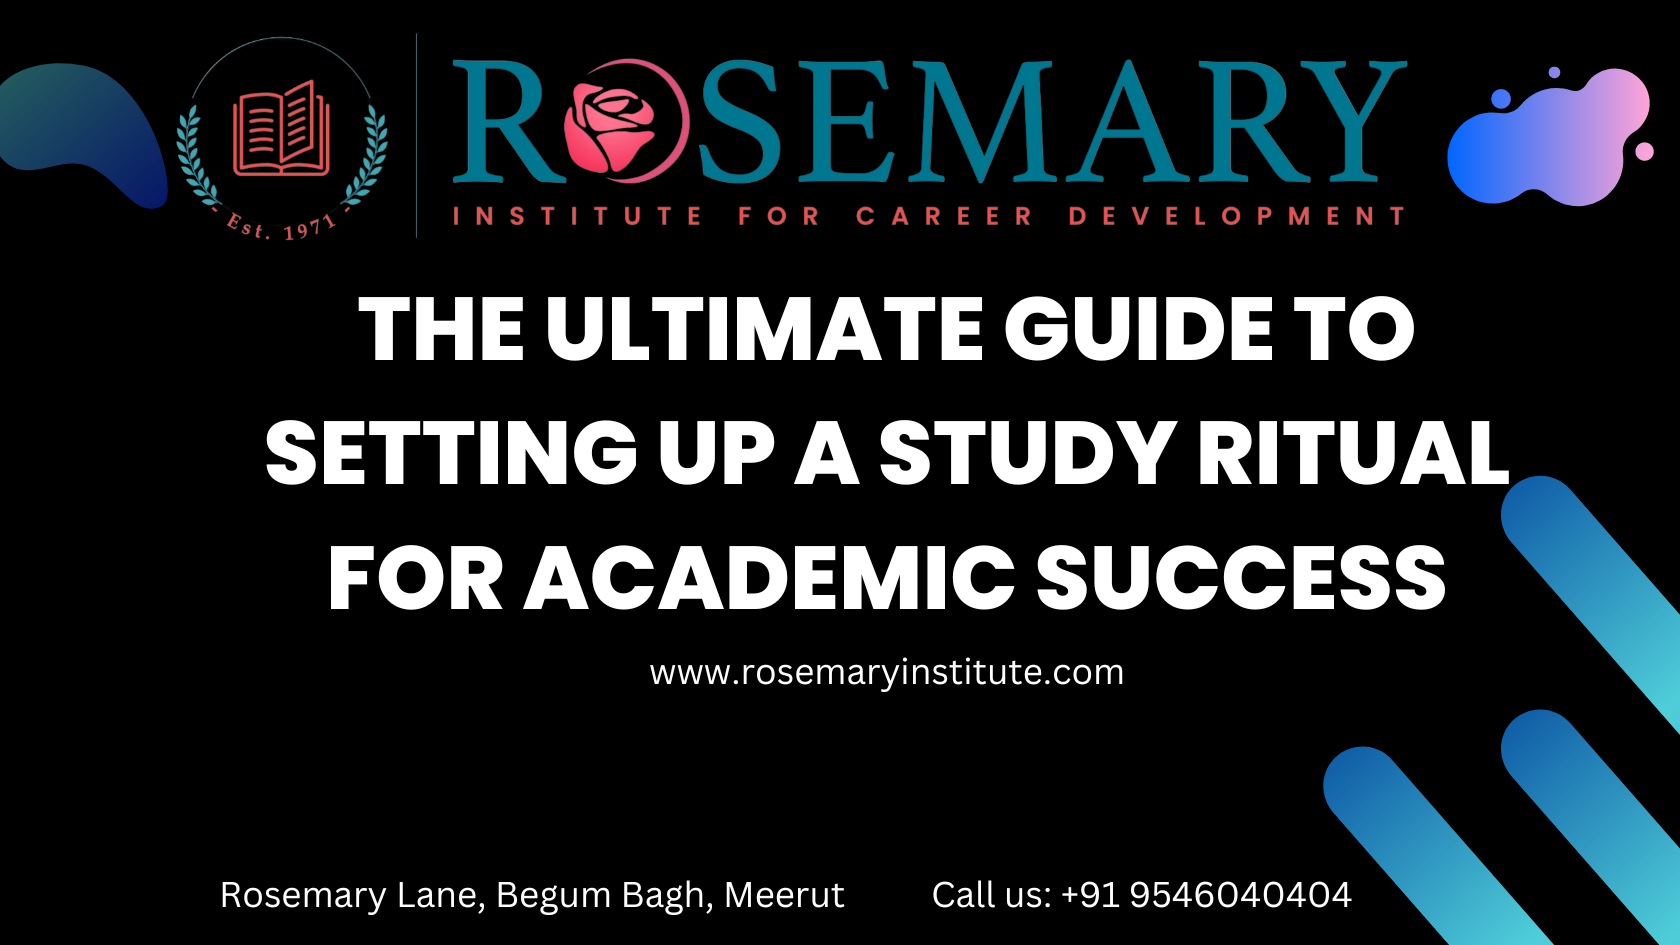 The Ultimate Guide to Setting Up a Study Ritual for Academic Success